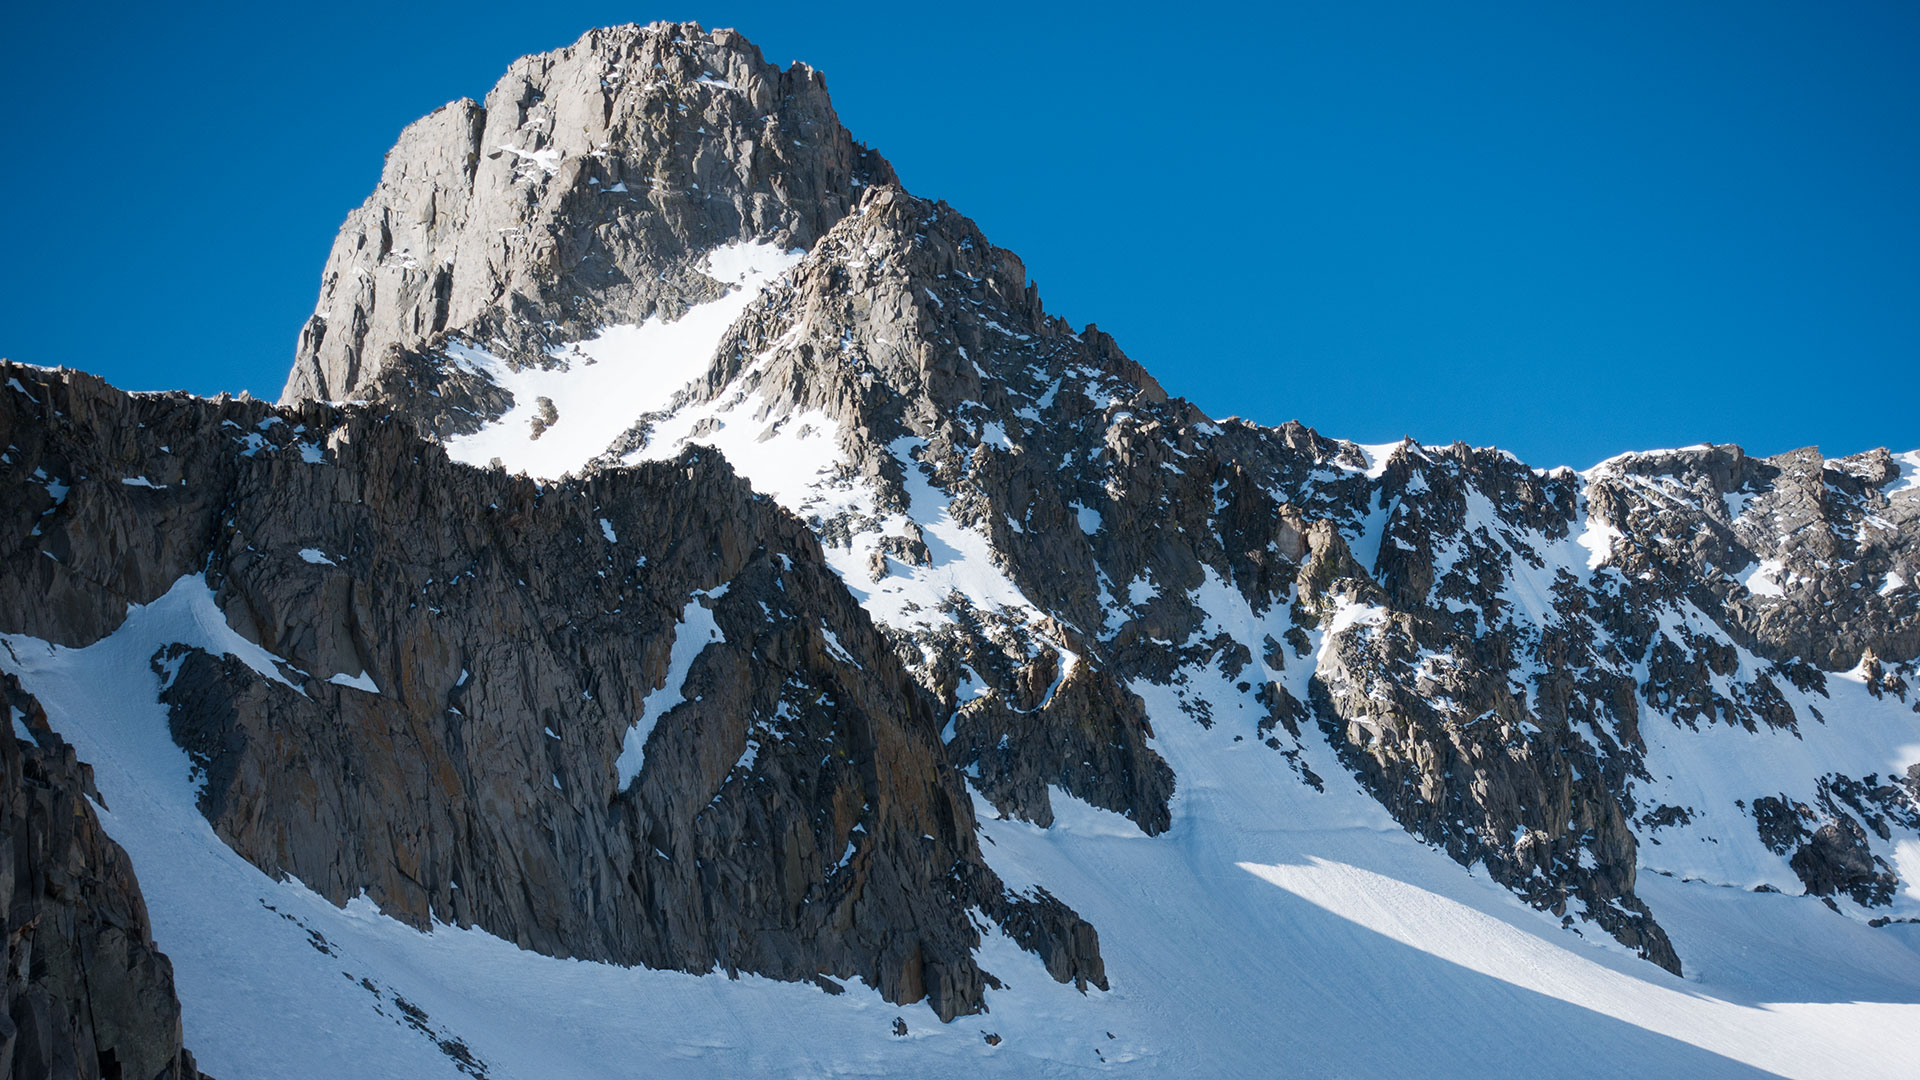 Mount Sill and the L-Shaped (North) Couloir from the Palisade Glacier